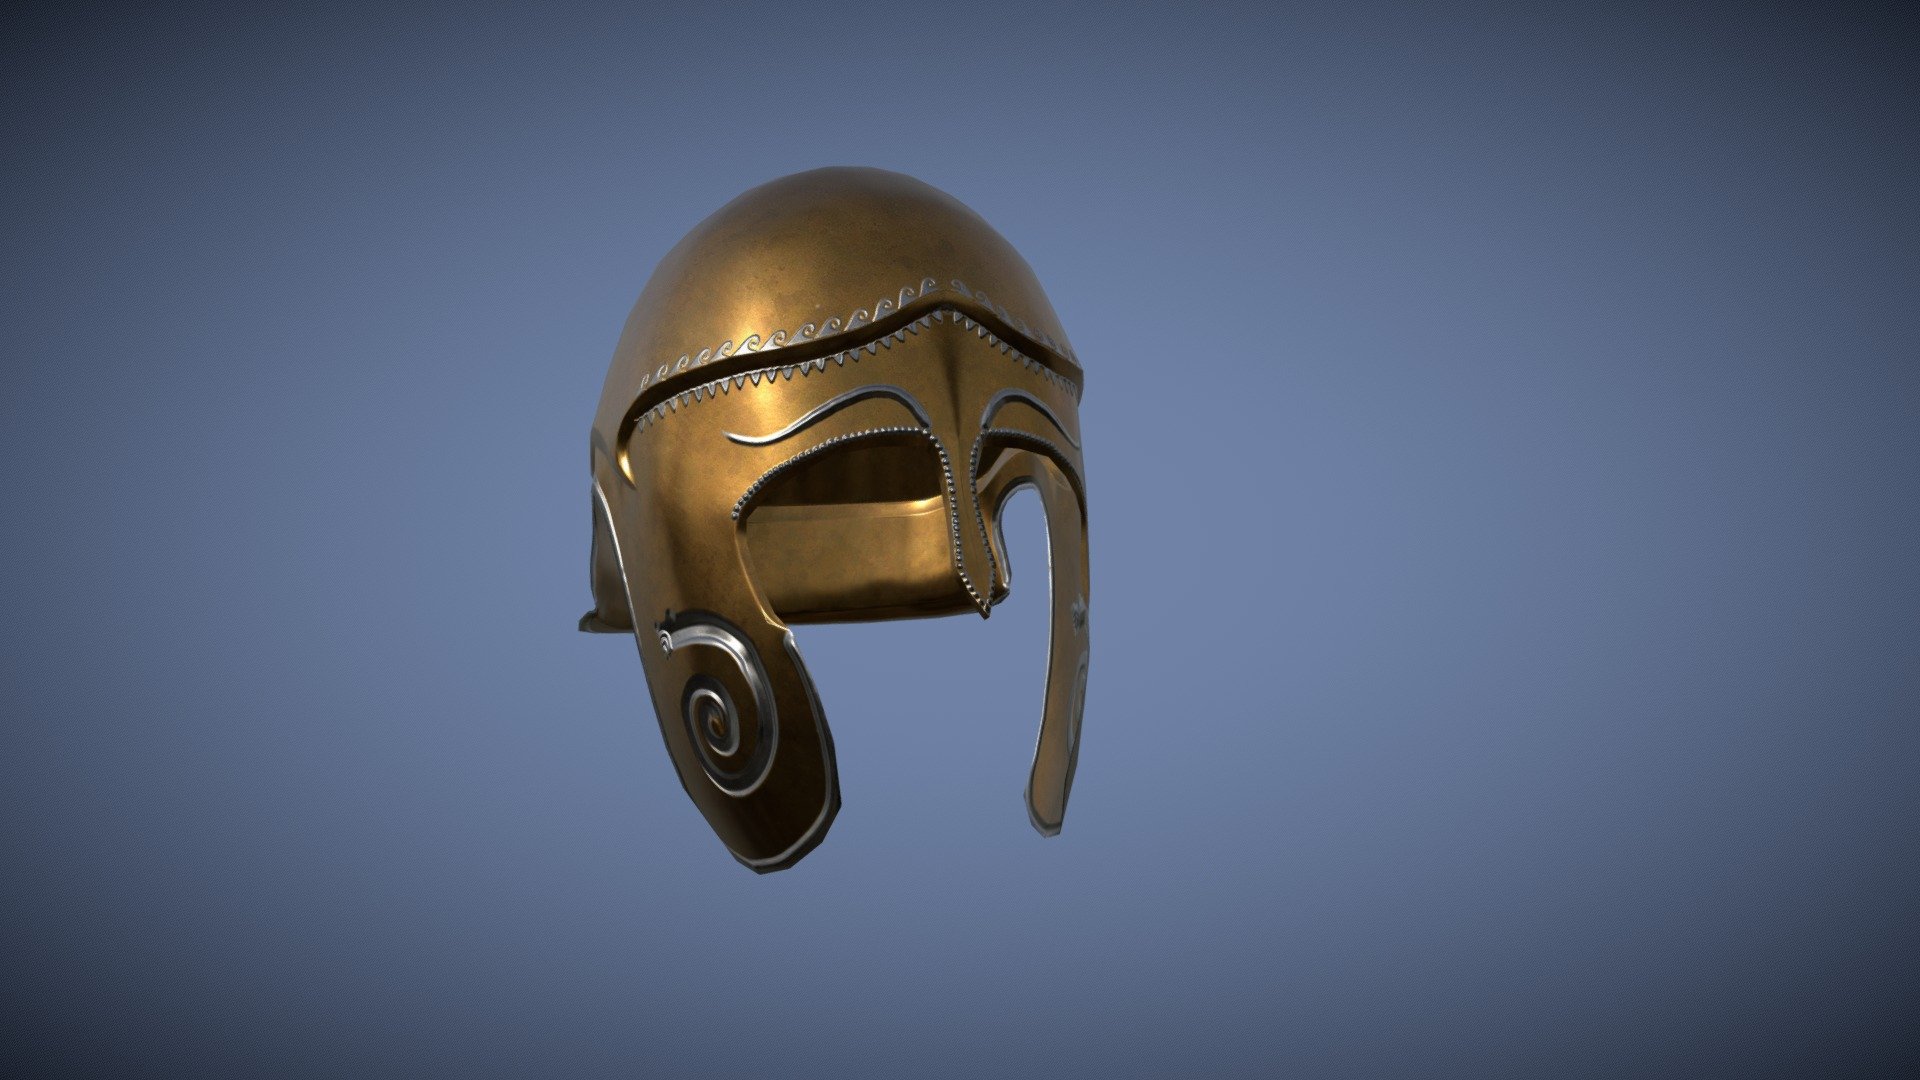 A Chalcidian Helmet

Made for the RIR: Imperium Surrectum mod, for the game Rome Total War Remastered.

Made in Blender - 603 vertices

The creative process consists of modelling the low-poly version, followed by high poly version through the use of the Multi-Res modifier. Any details that the piece might present are sculpted on this copy, after which, they are baked into its low poly counterpart. The goal here is to avoid modelling the additional detail - which would increase the vert count - while still maintaining the illusion that the helmet contains such details 3d model